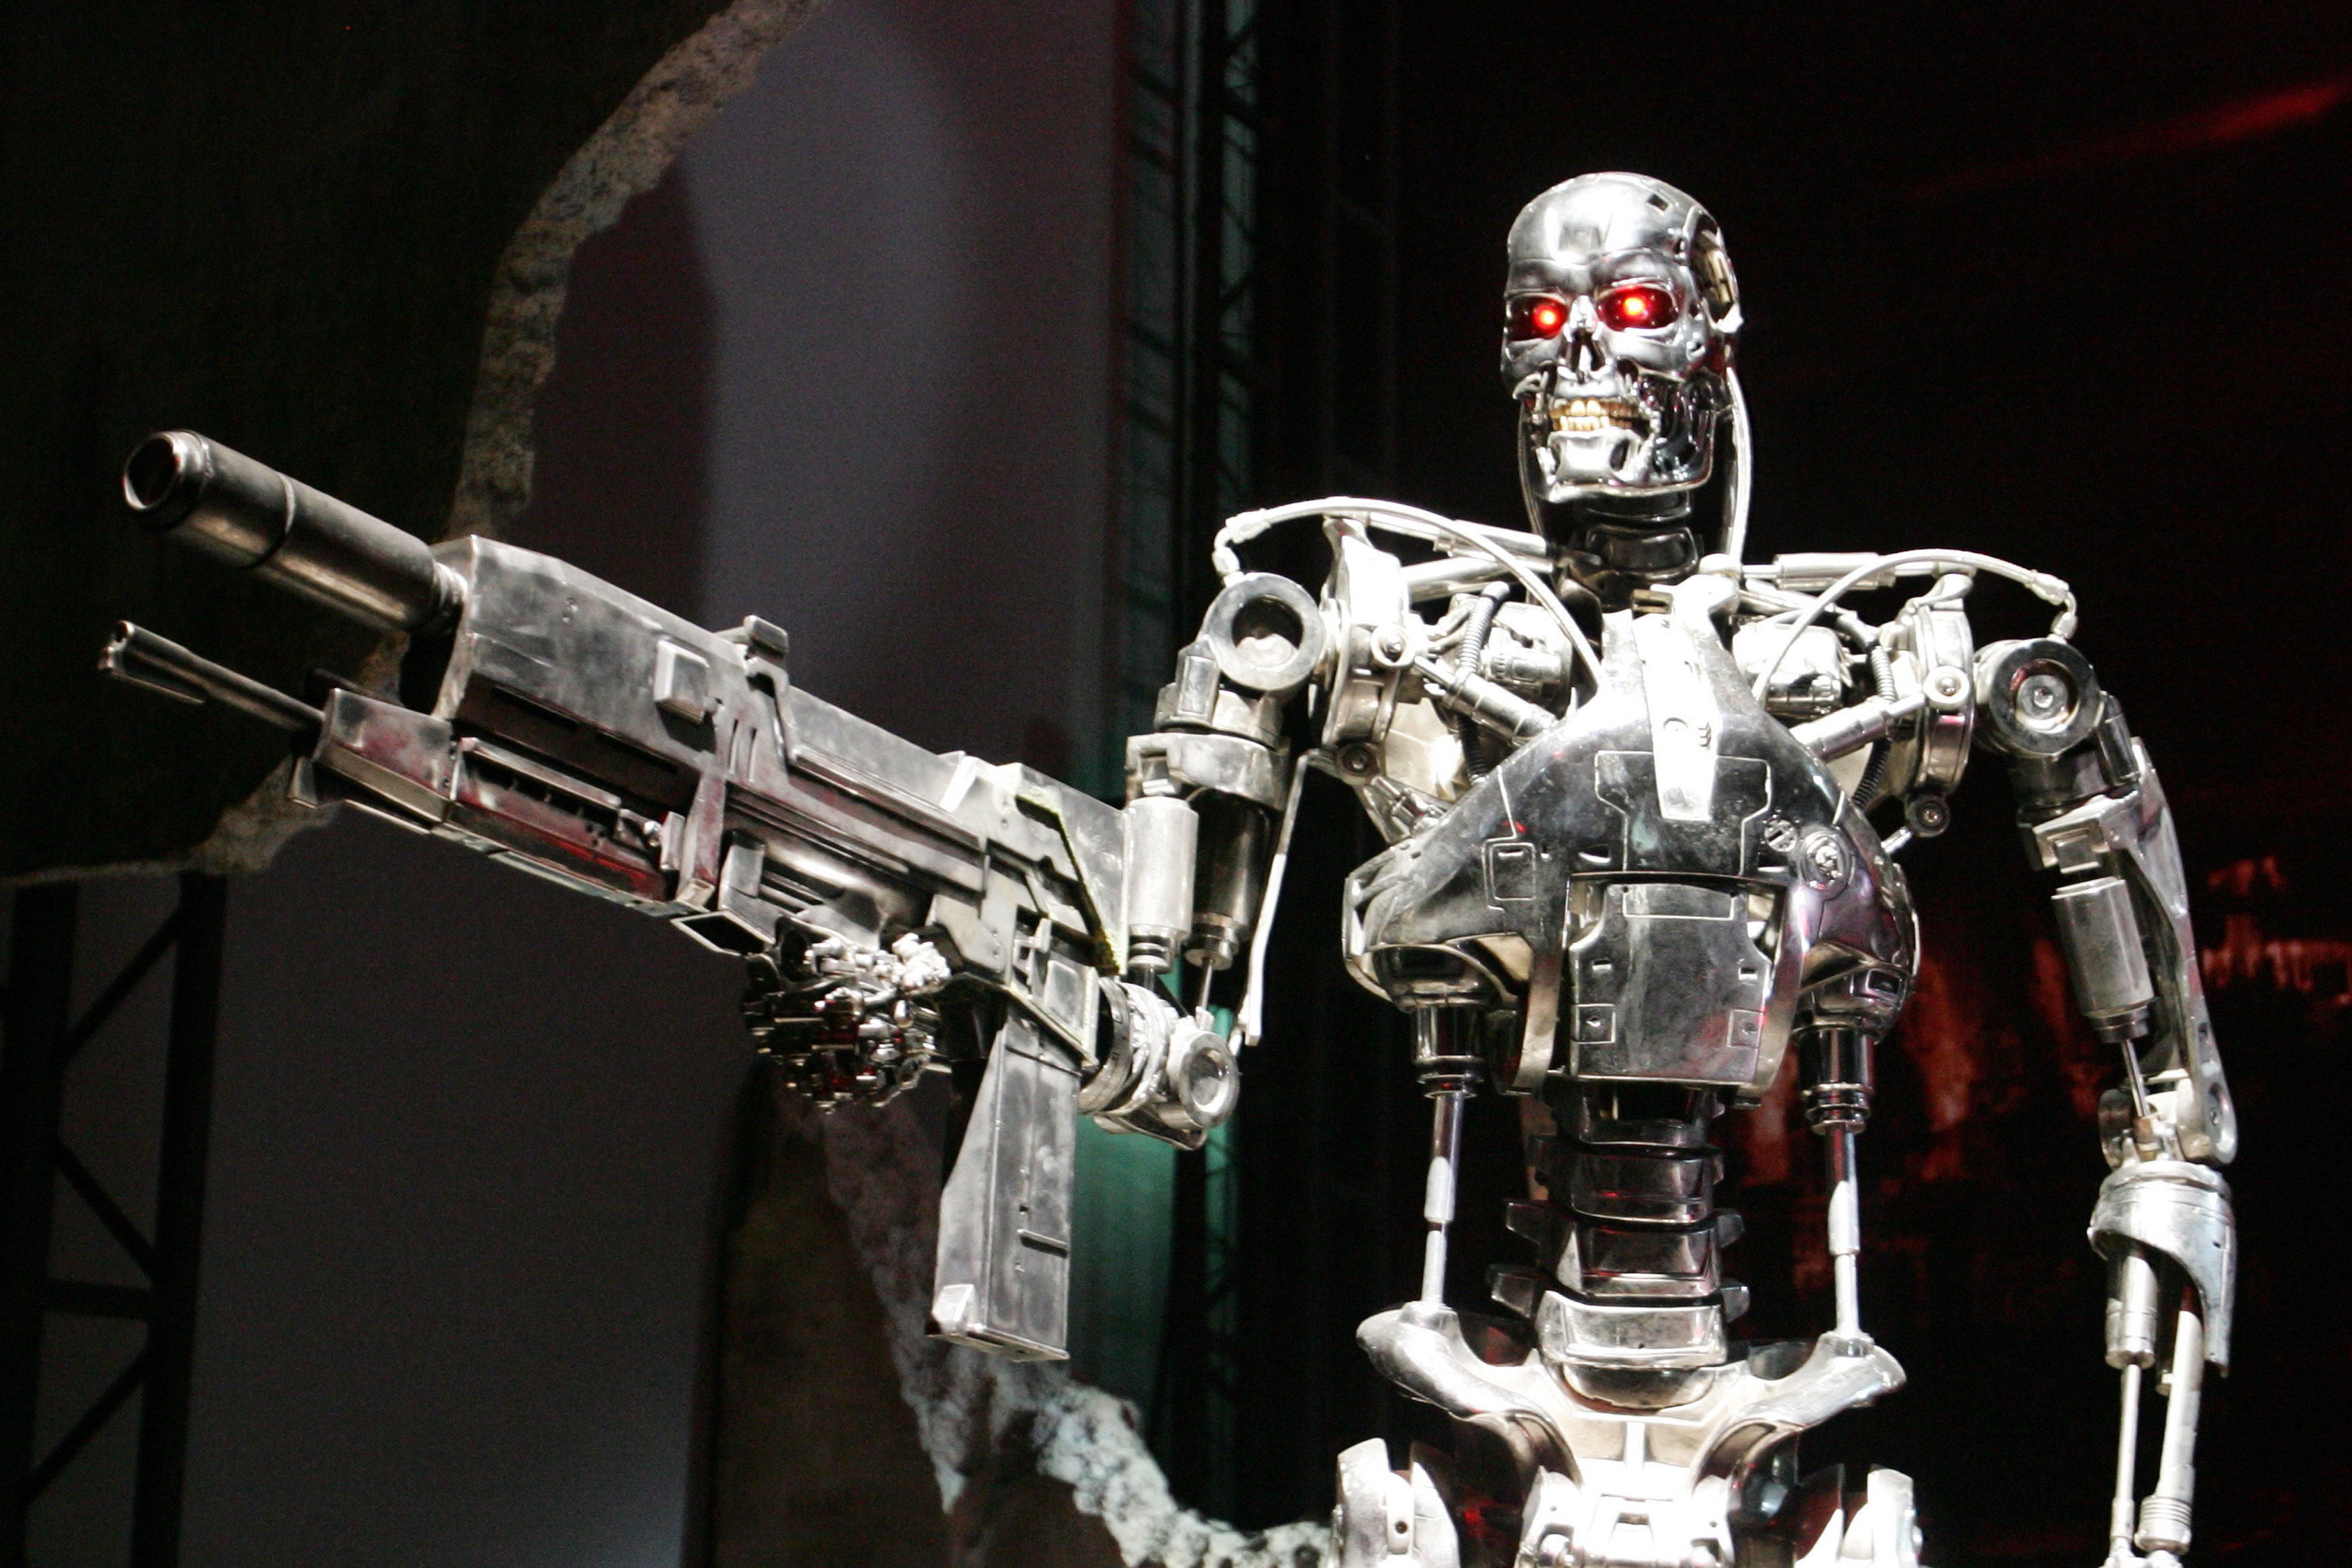 Terminator Exhibition - Battle or Coexistence ? Robots and Our Future’ in Tokyo.